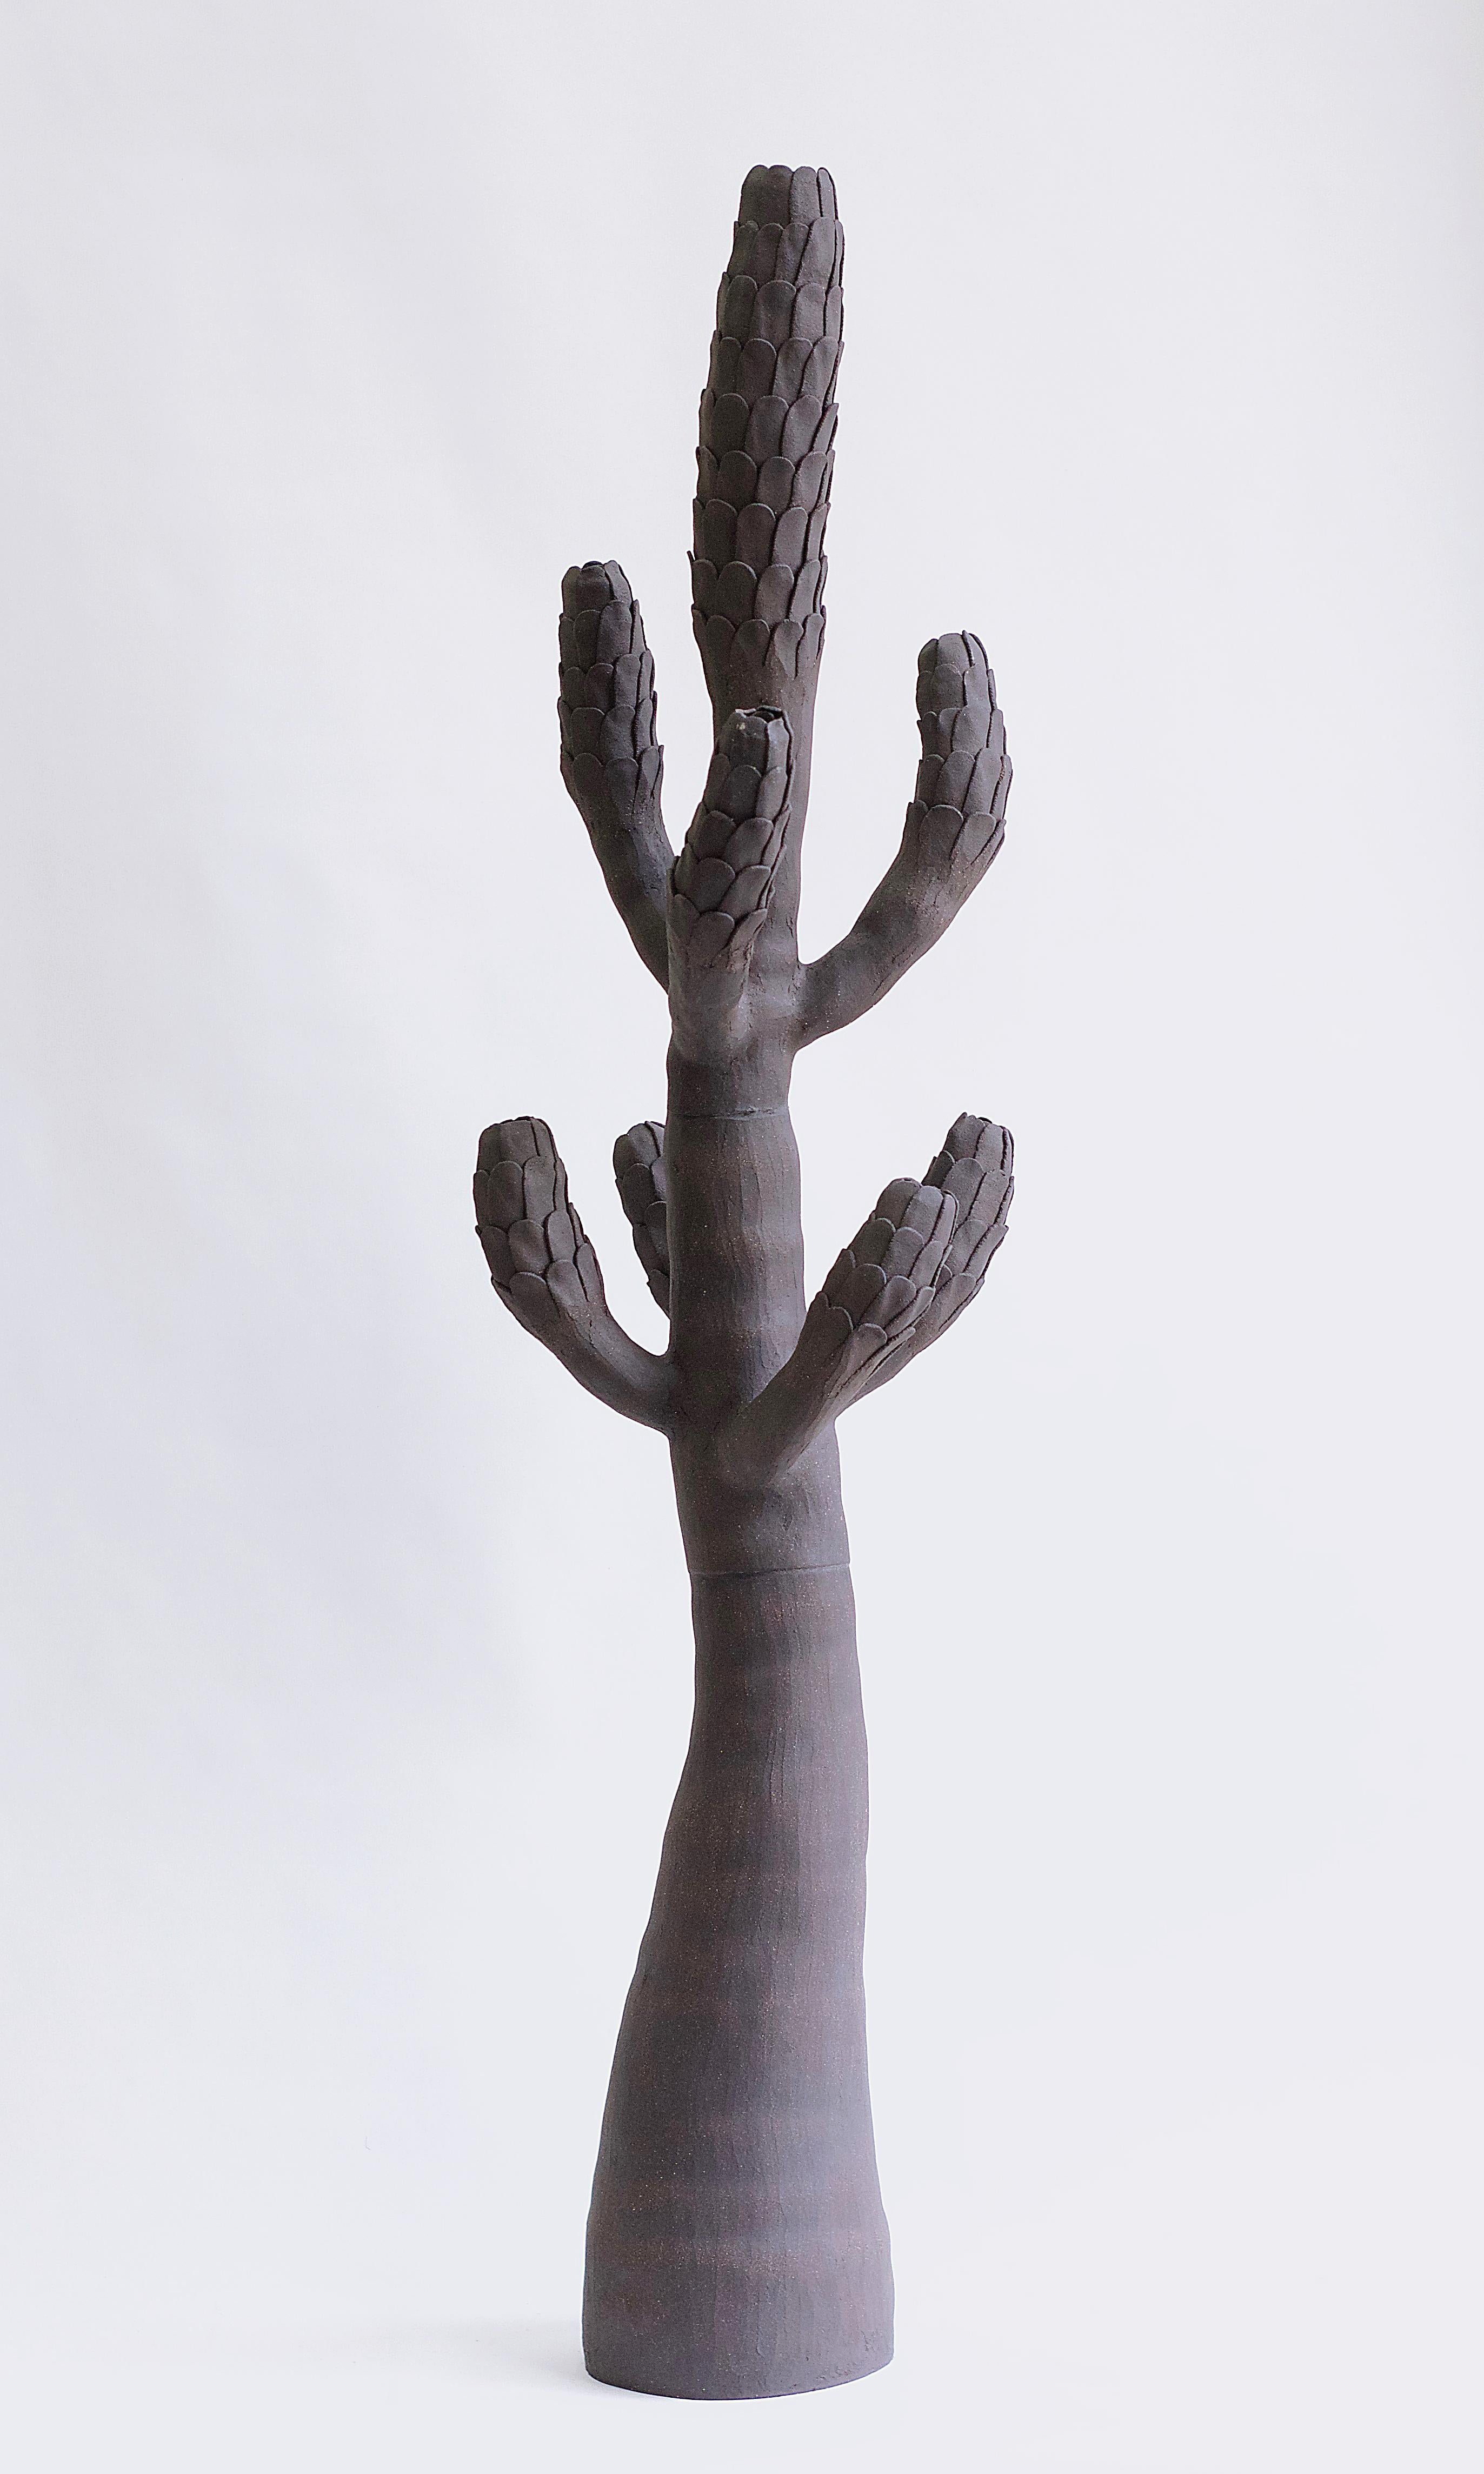 Large ceramic cactus with scaled branches. The organic forms and rich textures express the intense beauty of nature in all its irregularity. This freeform sculpture seems to have sprung up spontaneously like a cactus in an Arizona desert, but